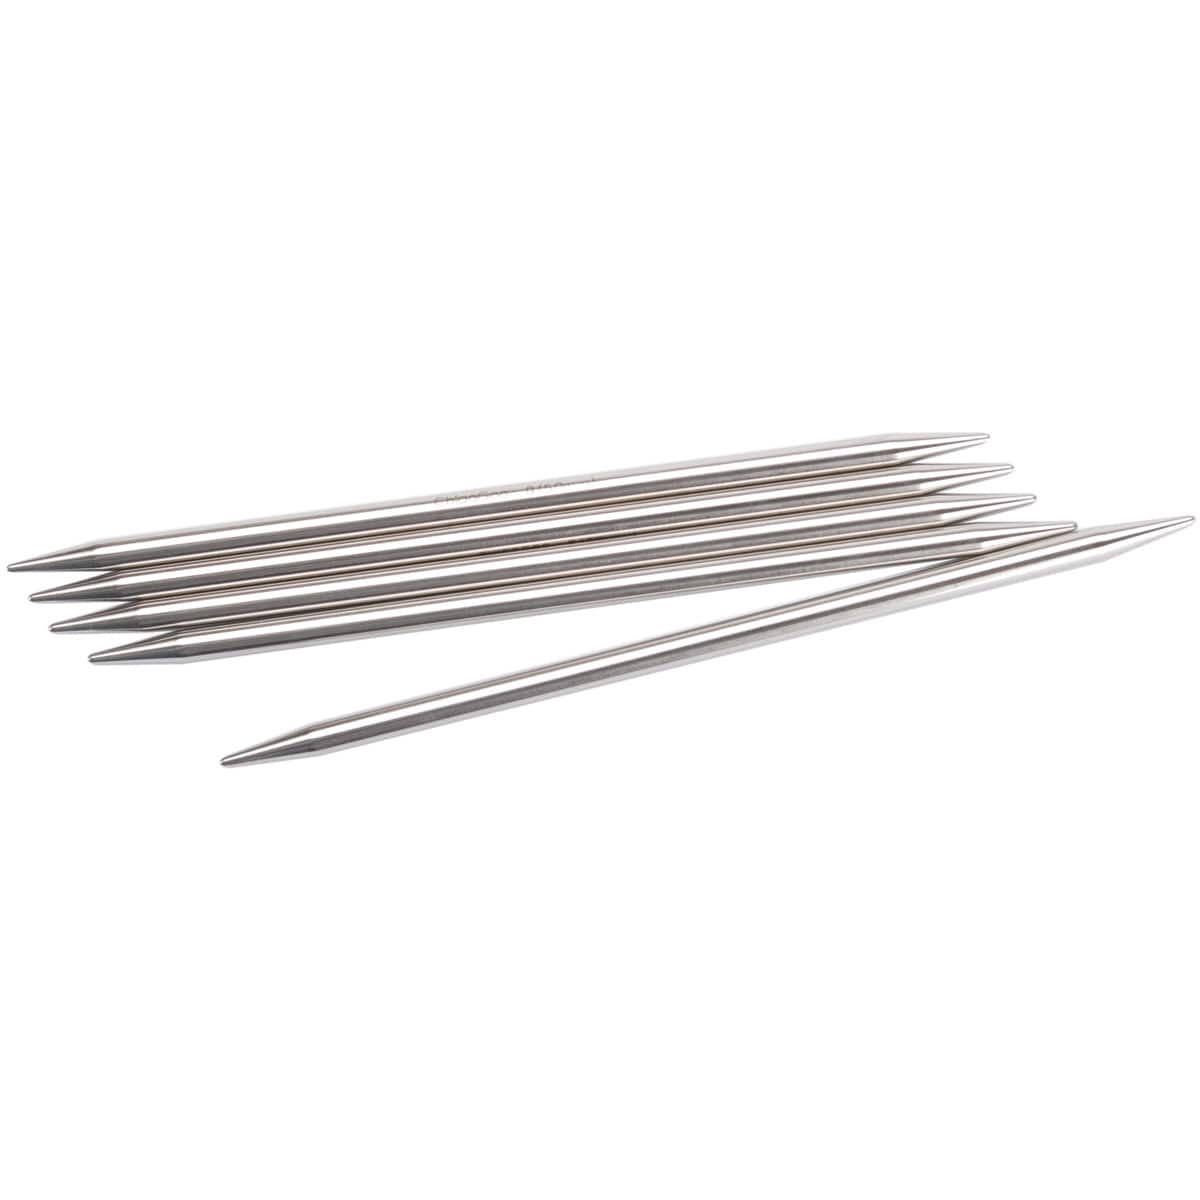 Size 7 10 Double Pointed Bone Knitting Needles - Wm. Booth, Draper